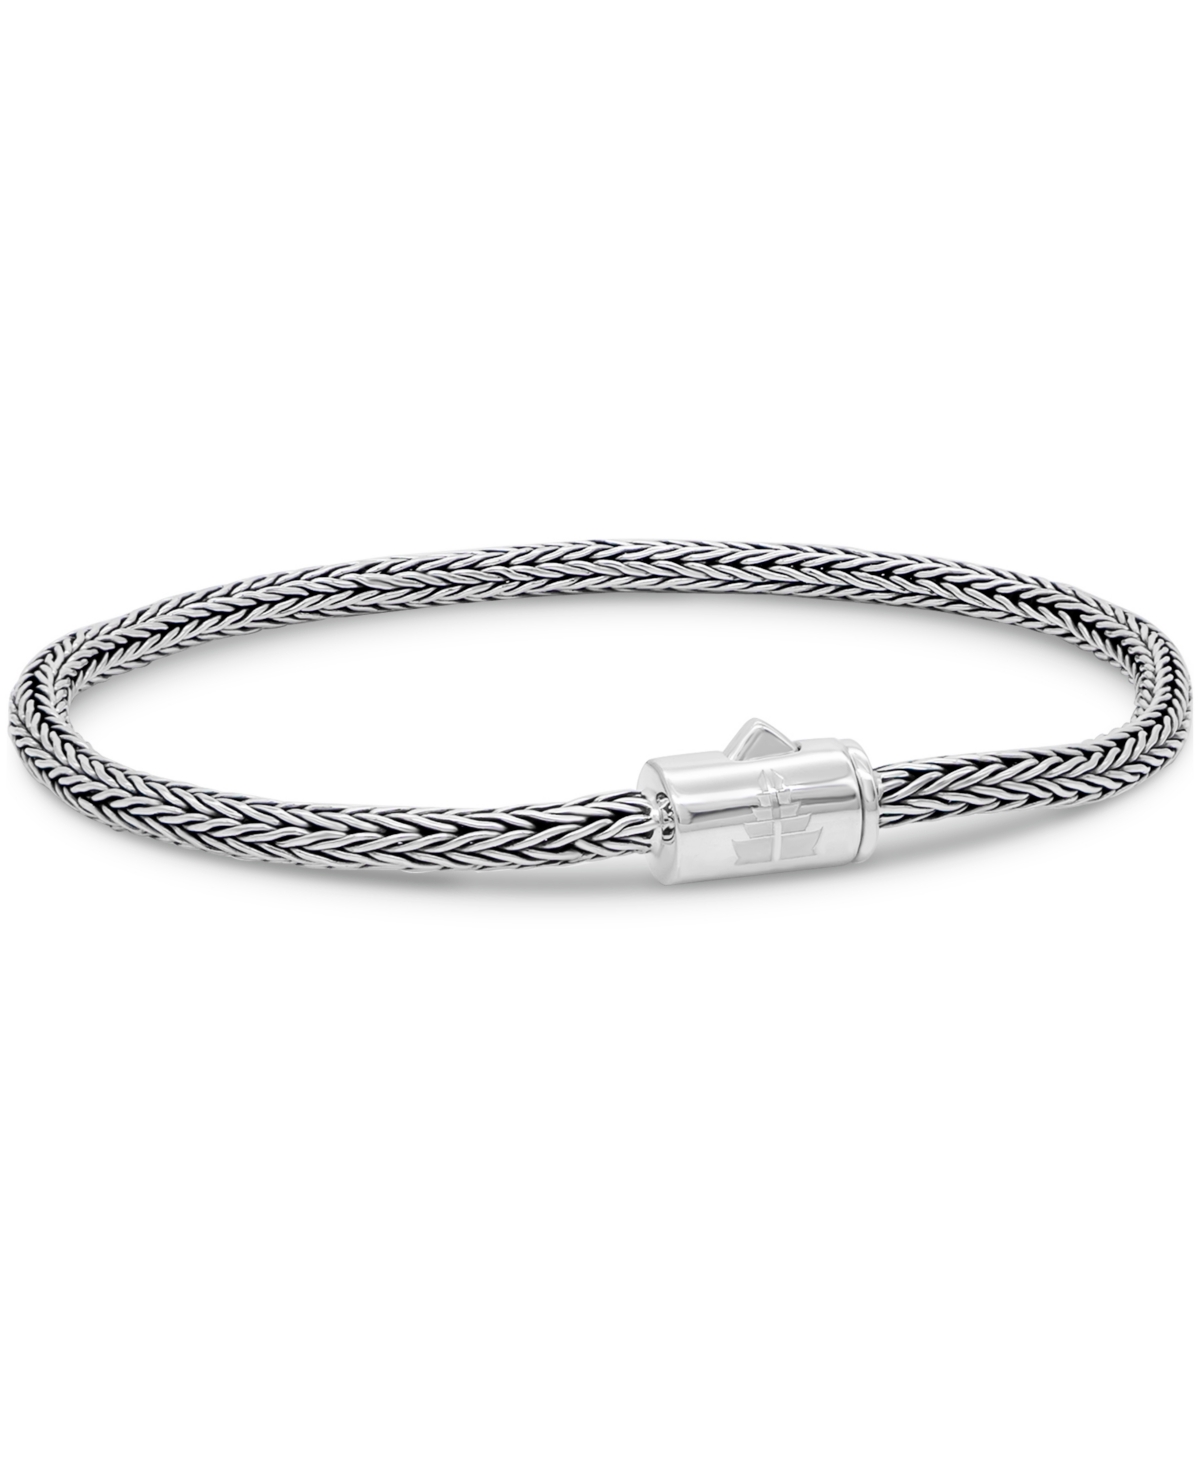 Foxtail Round 3mm Chain Bracelet in Sterling Silver - Silver